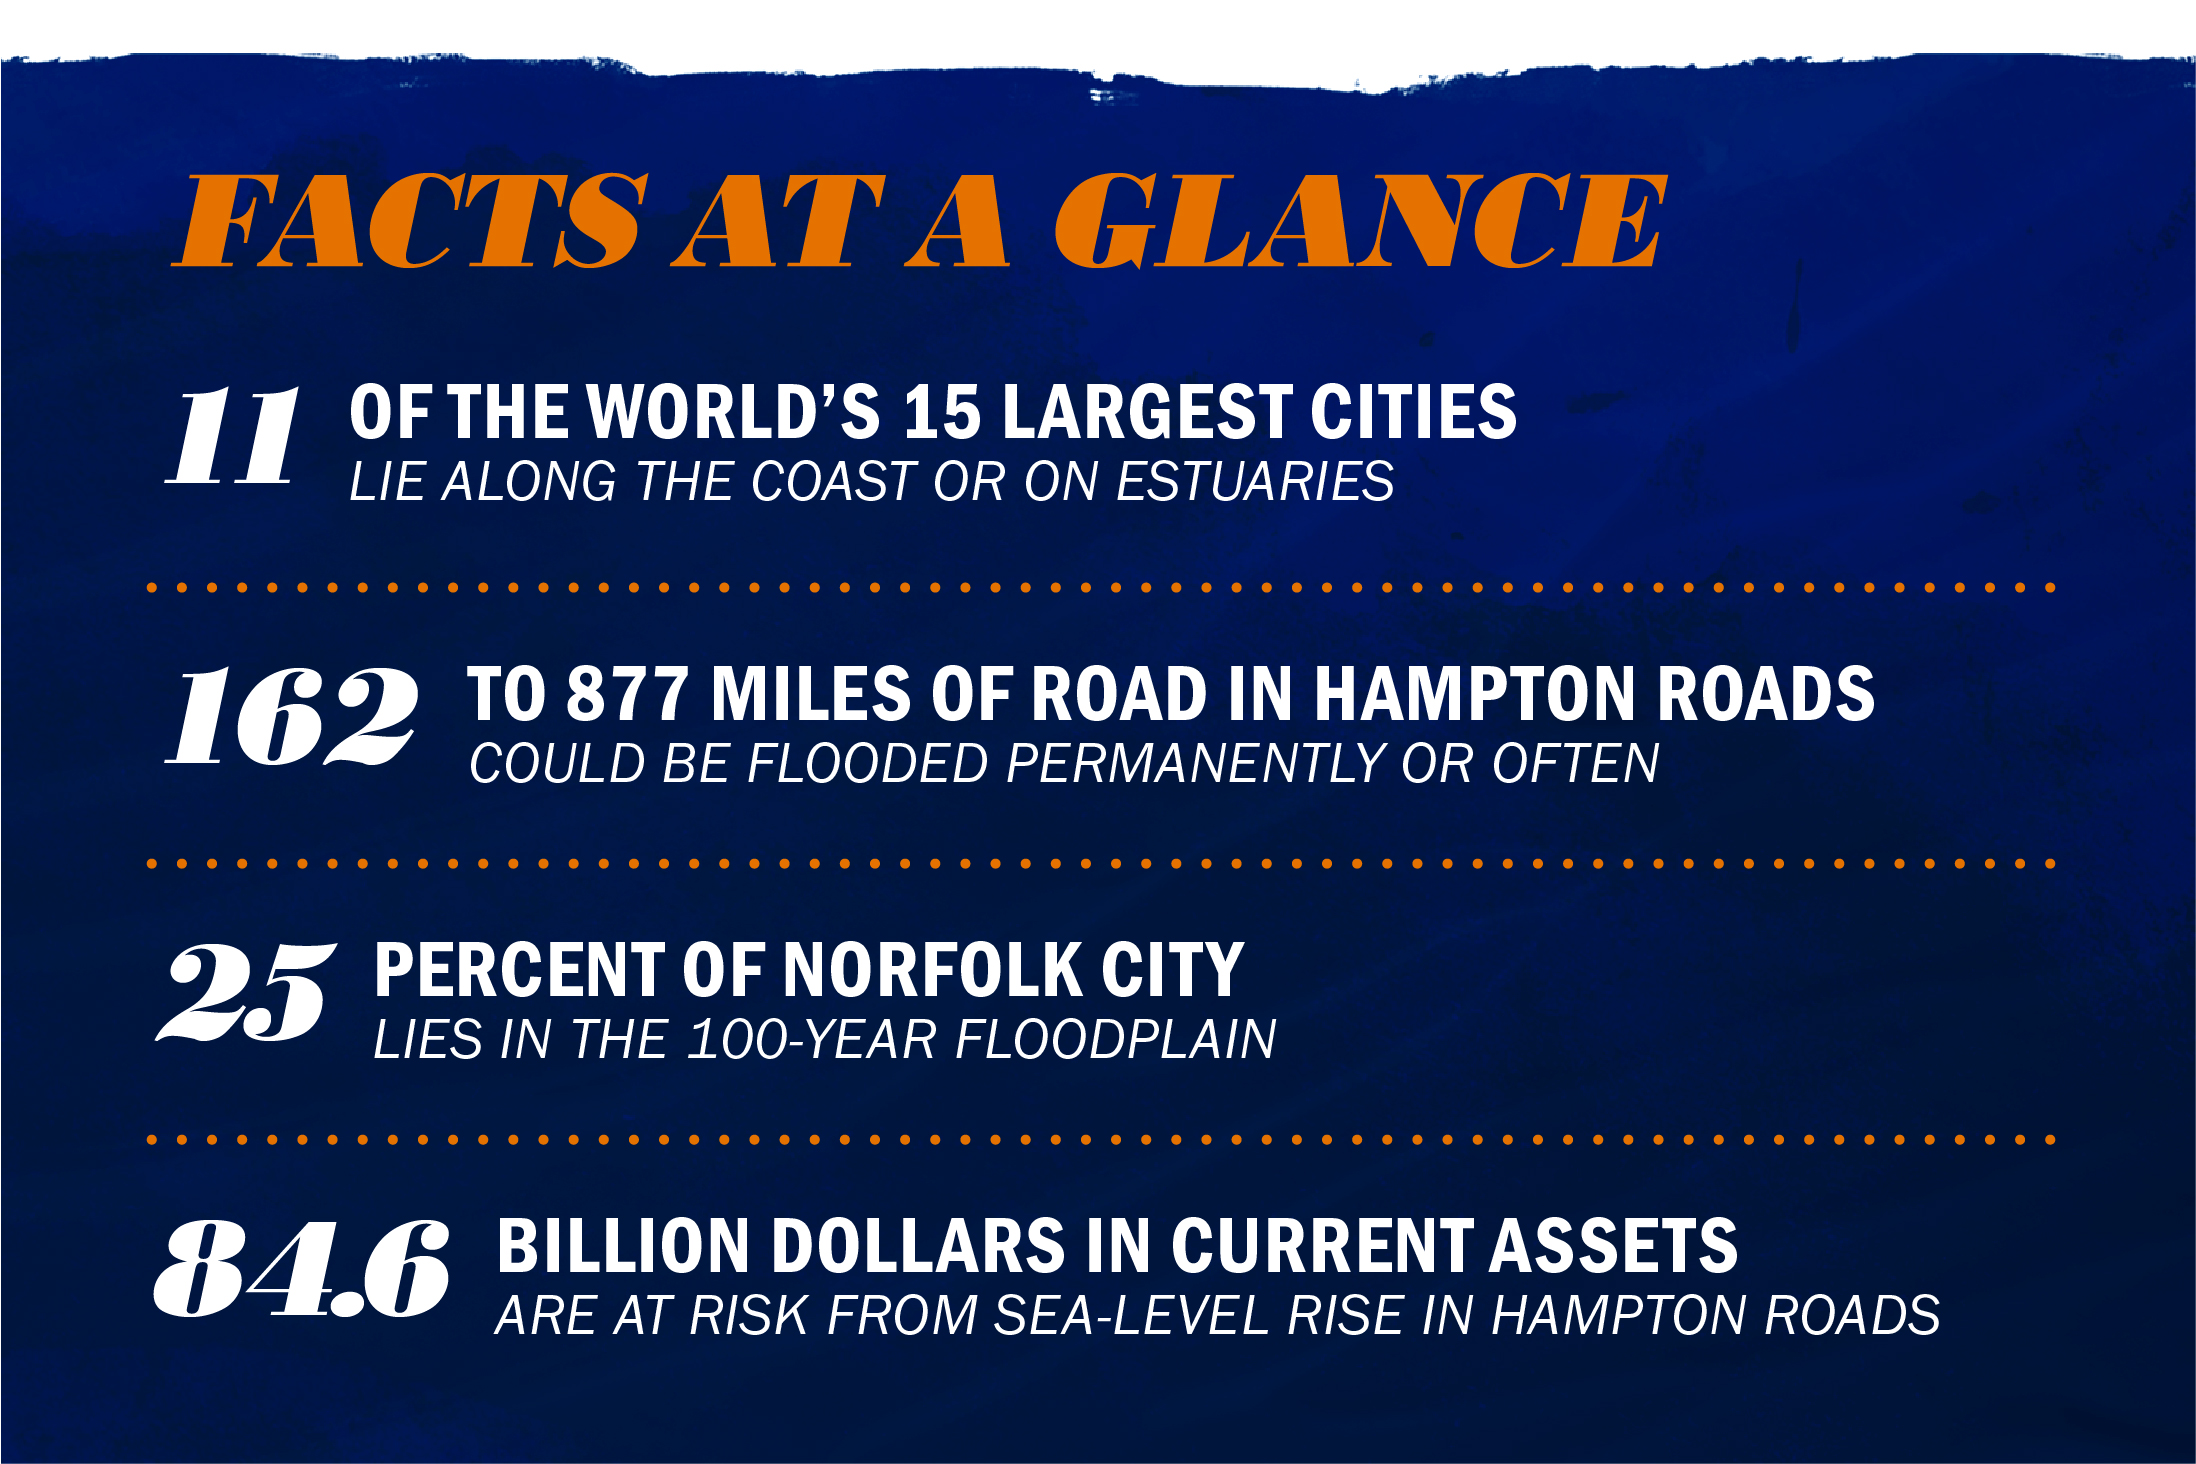 Text reads: Facts at a Glance.  11 of the world's 15 largest cities lie along the coast or on estuaries.  162 to 877 miles  of road in Hampton roads could be flooded permanently or often. 25 percent of Norfolk city lies in the 100 year floodplain.  84.6 billion dollars in current assets are at risk from sea-level rise in Hampton roads